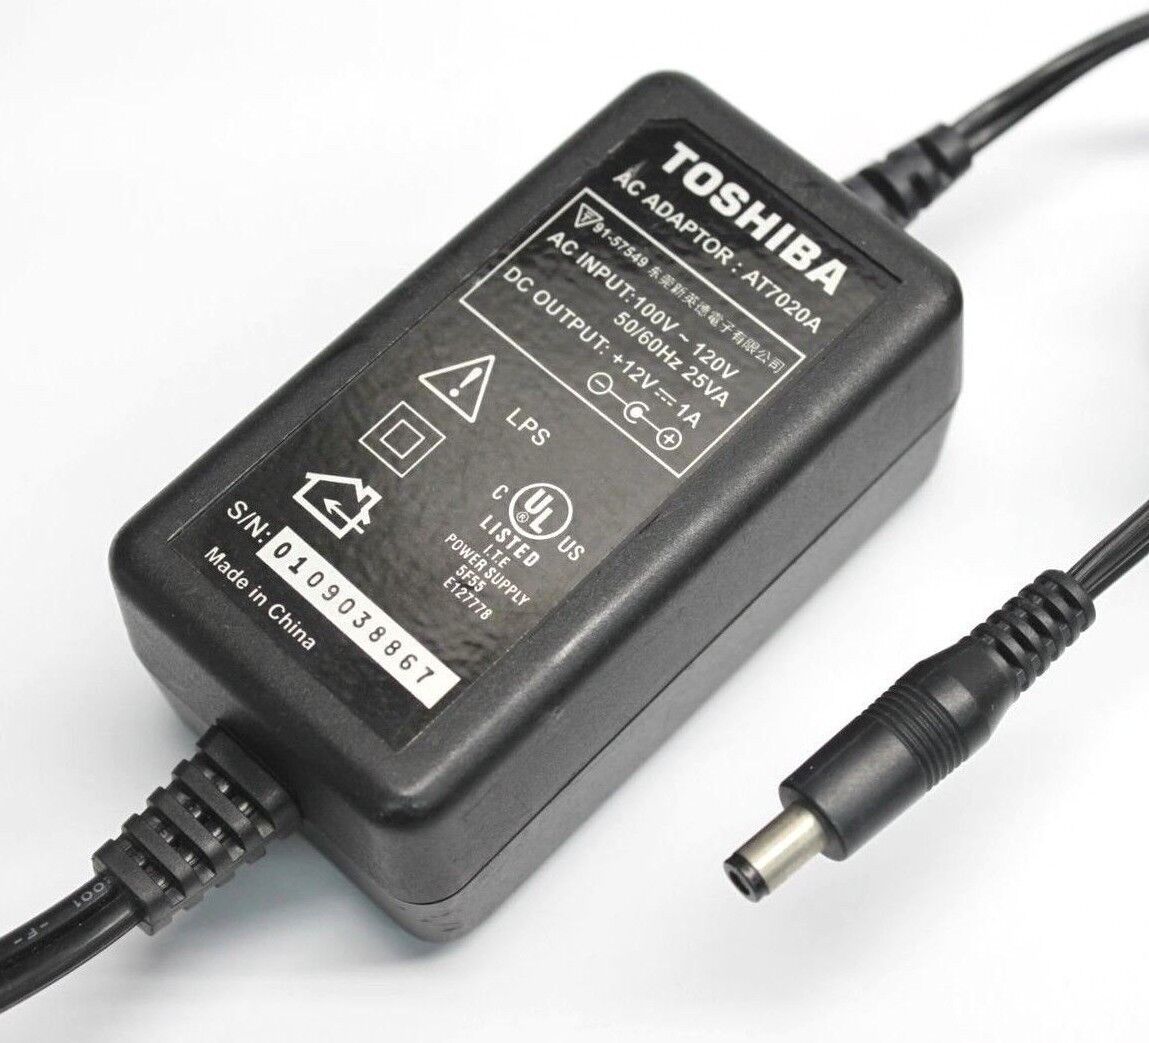 Original Toshiba AT7020A AC Adapter DC 12V 1A 1000mA Power Supply Cord Charger